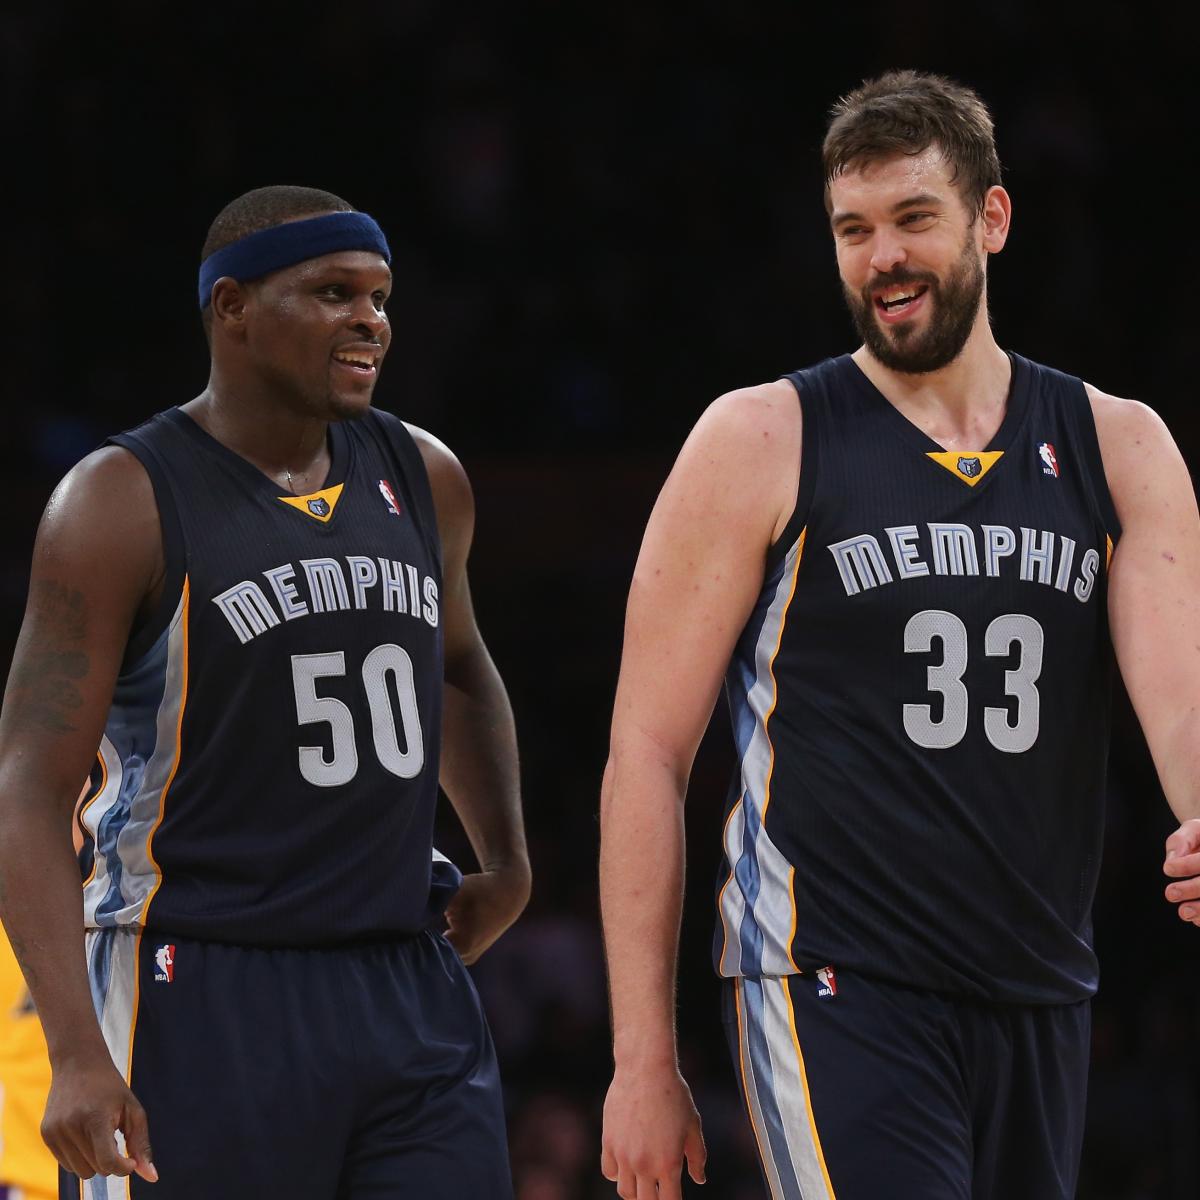 The Grizzlies will debut their - Basketball Forever